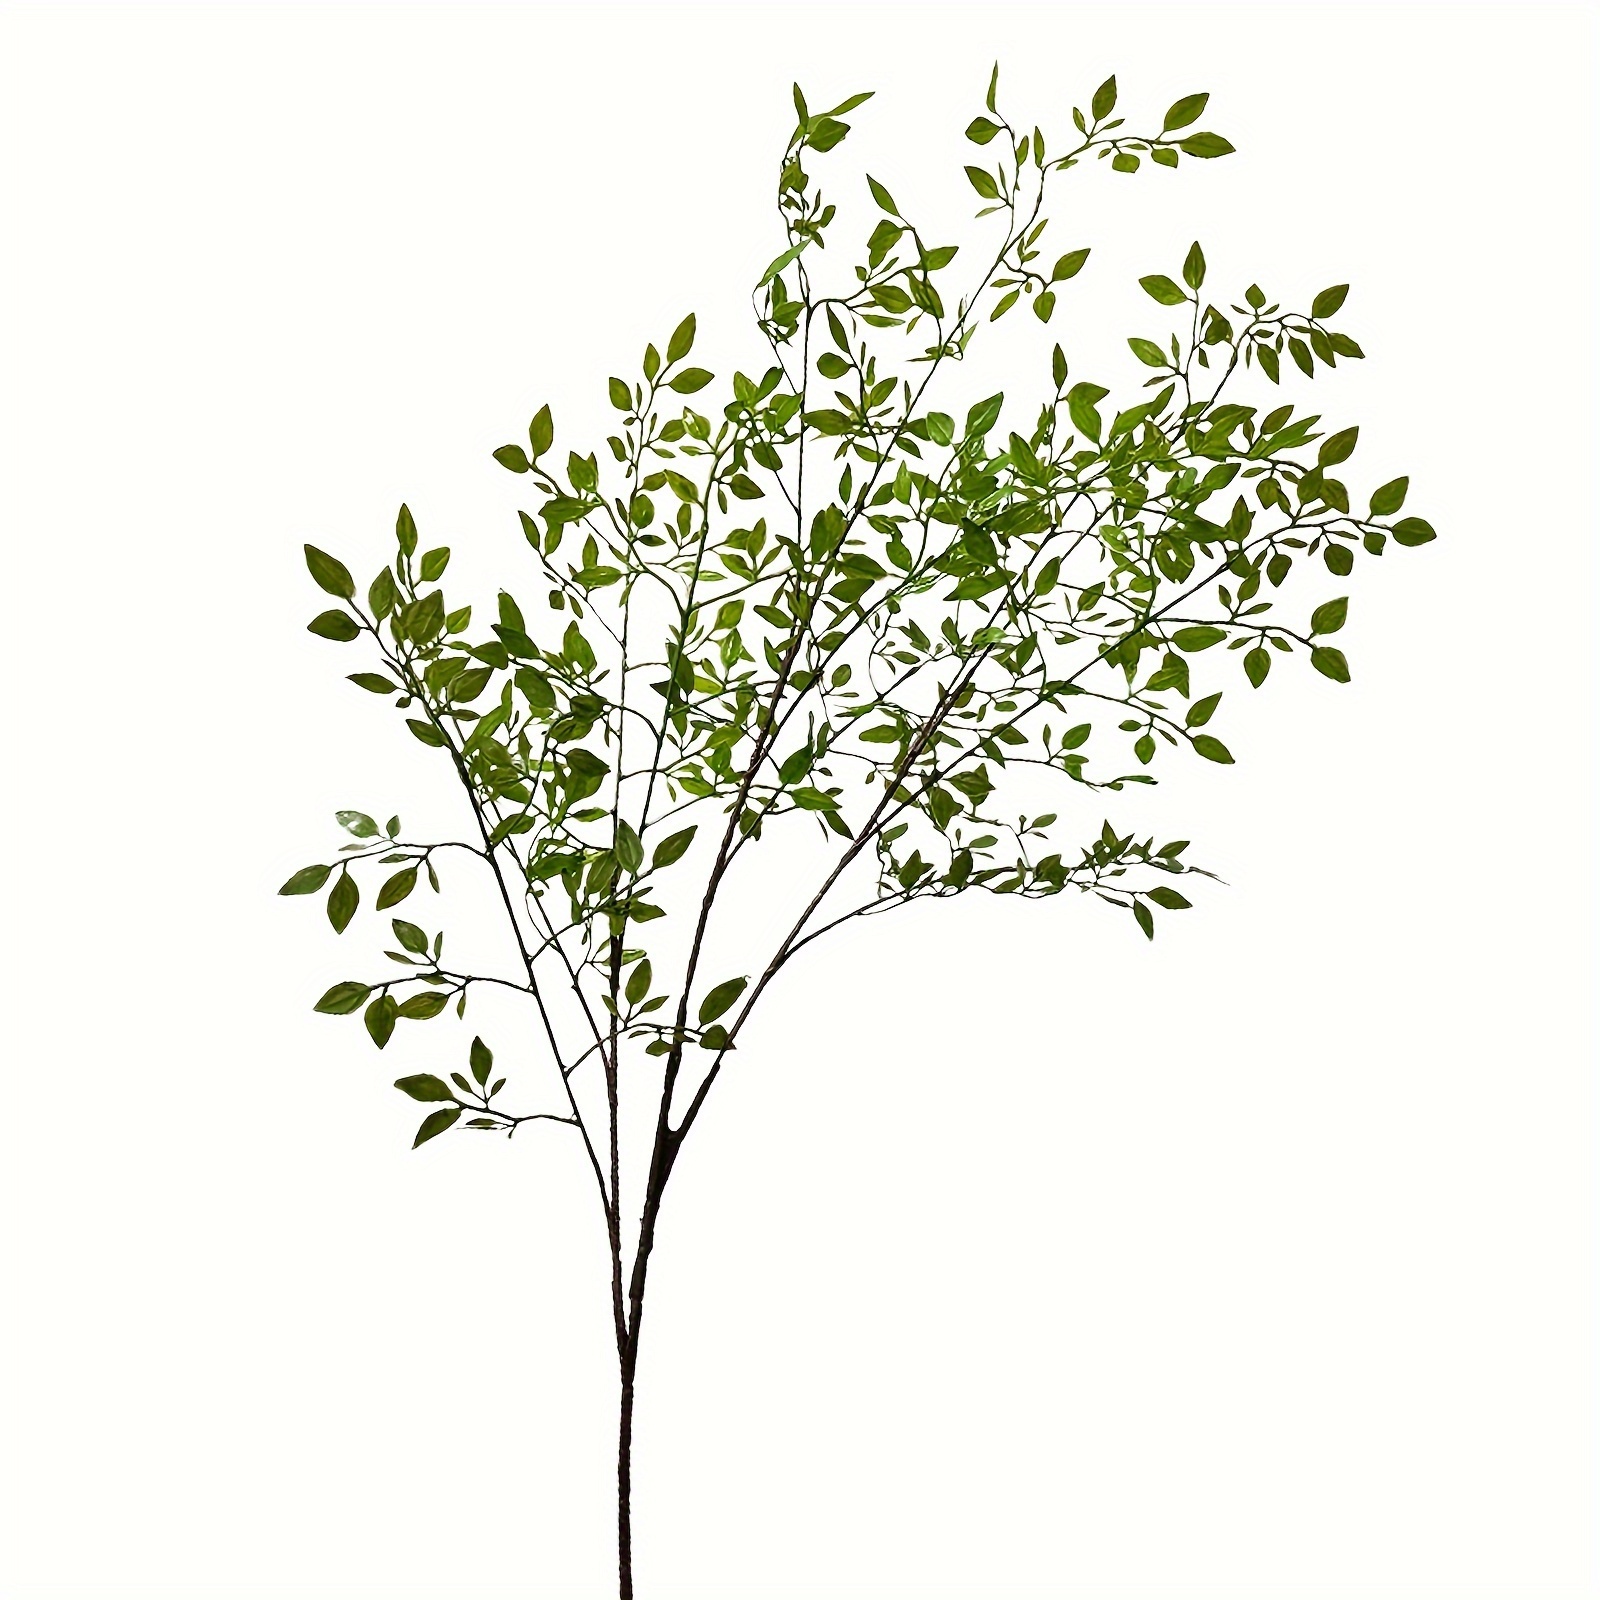 

1pc Artificial Plant, Faux Greenery Branches, Fake Green Leaves Spray Long Branches For Wedding Bouquet, Centerpiece Flower Floral Arrangement Home Decor, Spring Summer Decor